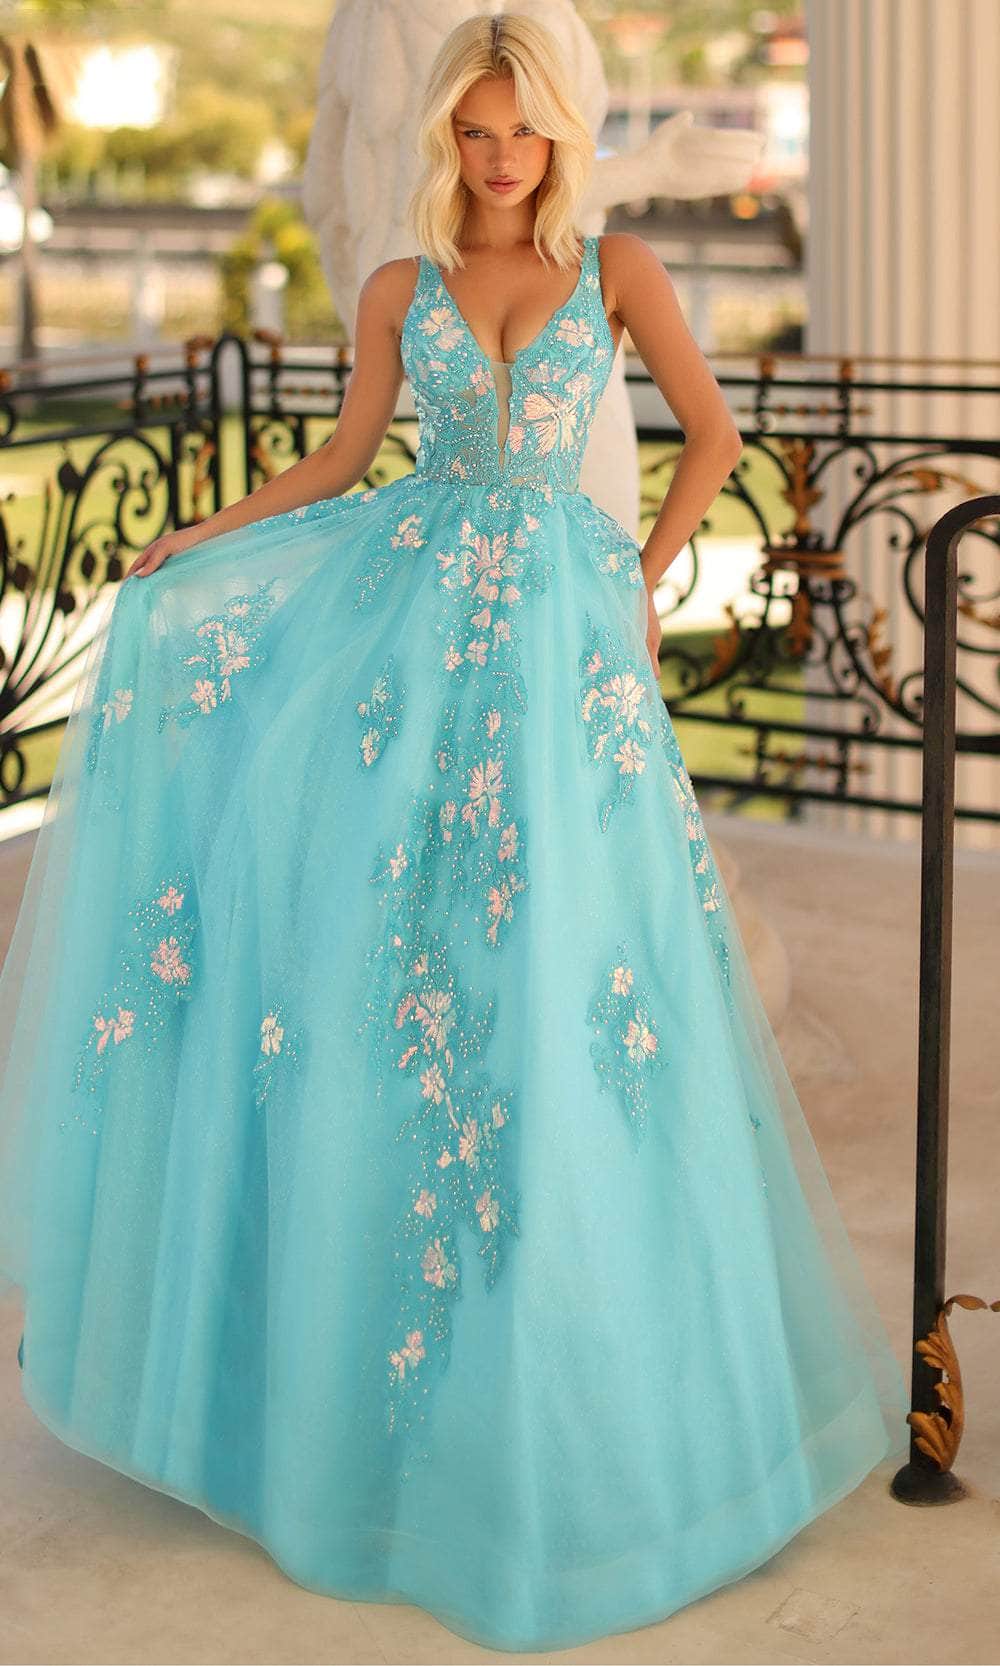 Image of Clarisse 810456 - Embroidered Cutout Back Ballgown